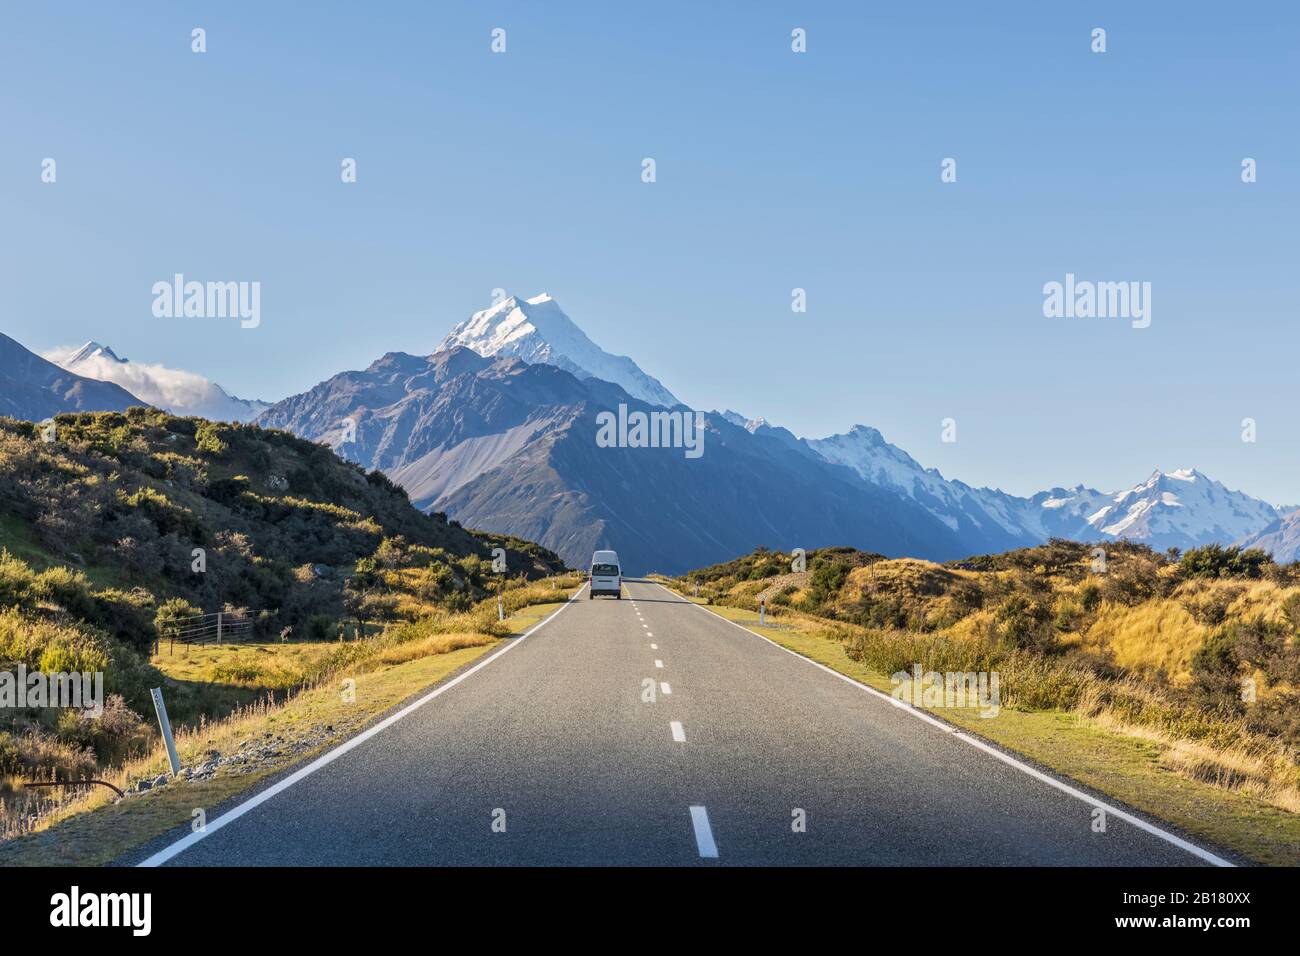 New Zealand, Oceania, South Island, Canterbury, Ben Ohau, Southern Alps (New Zealand Alps), Mount Cook National Park, Mount Cook Road and Aoraki / Mount Cook, Camper on road in mountain landscape Stock Photo